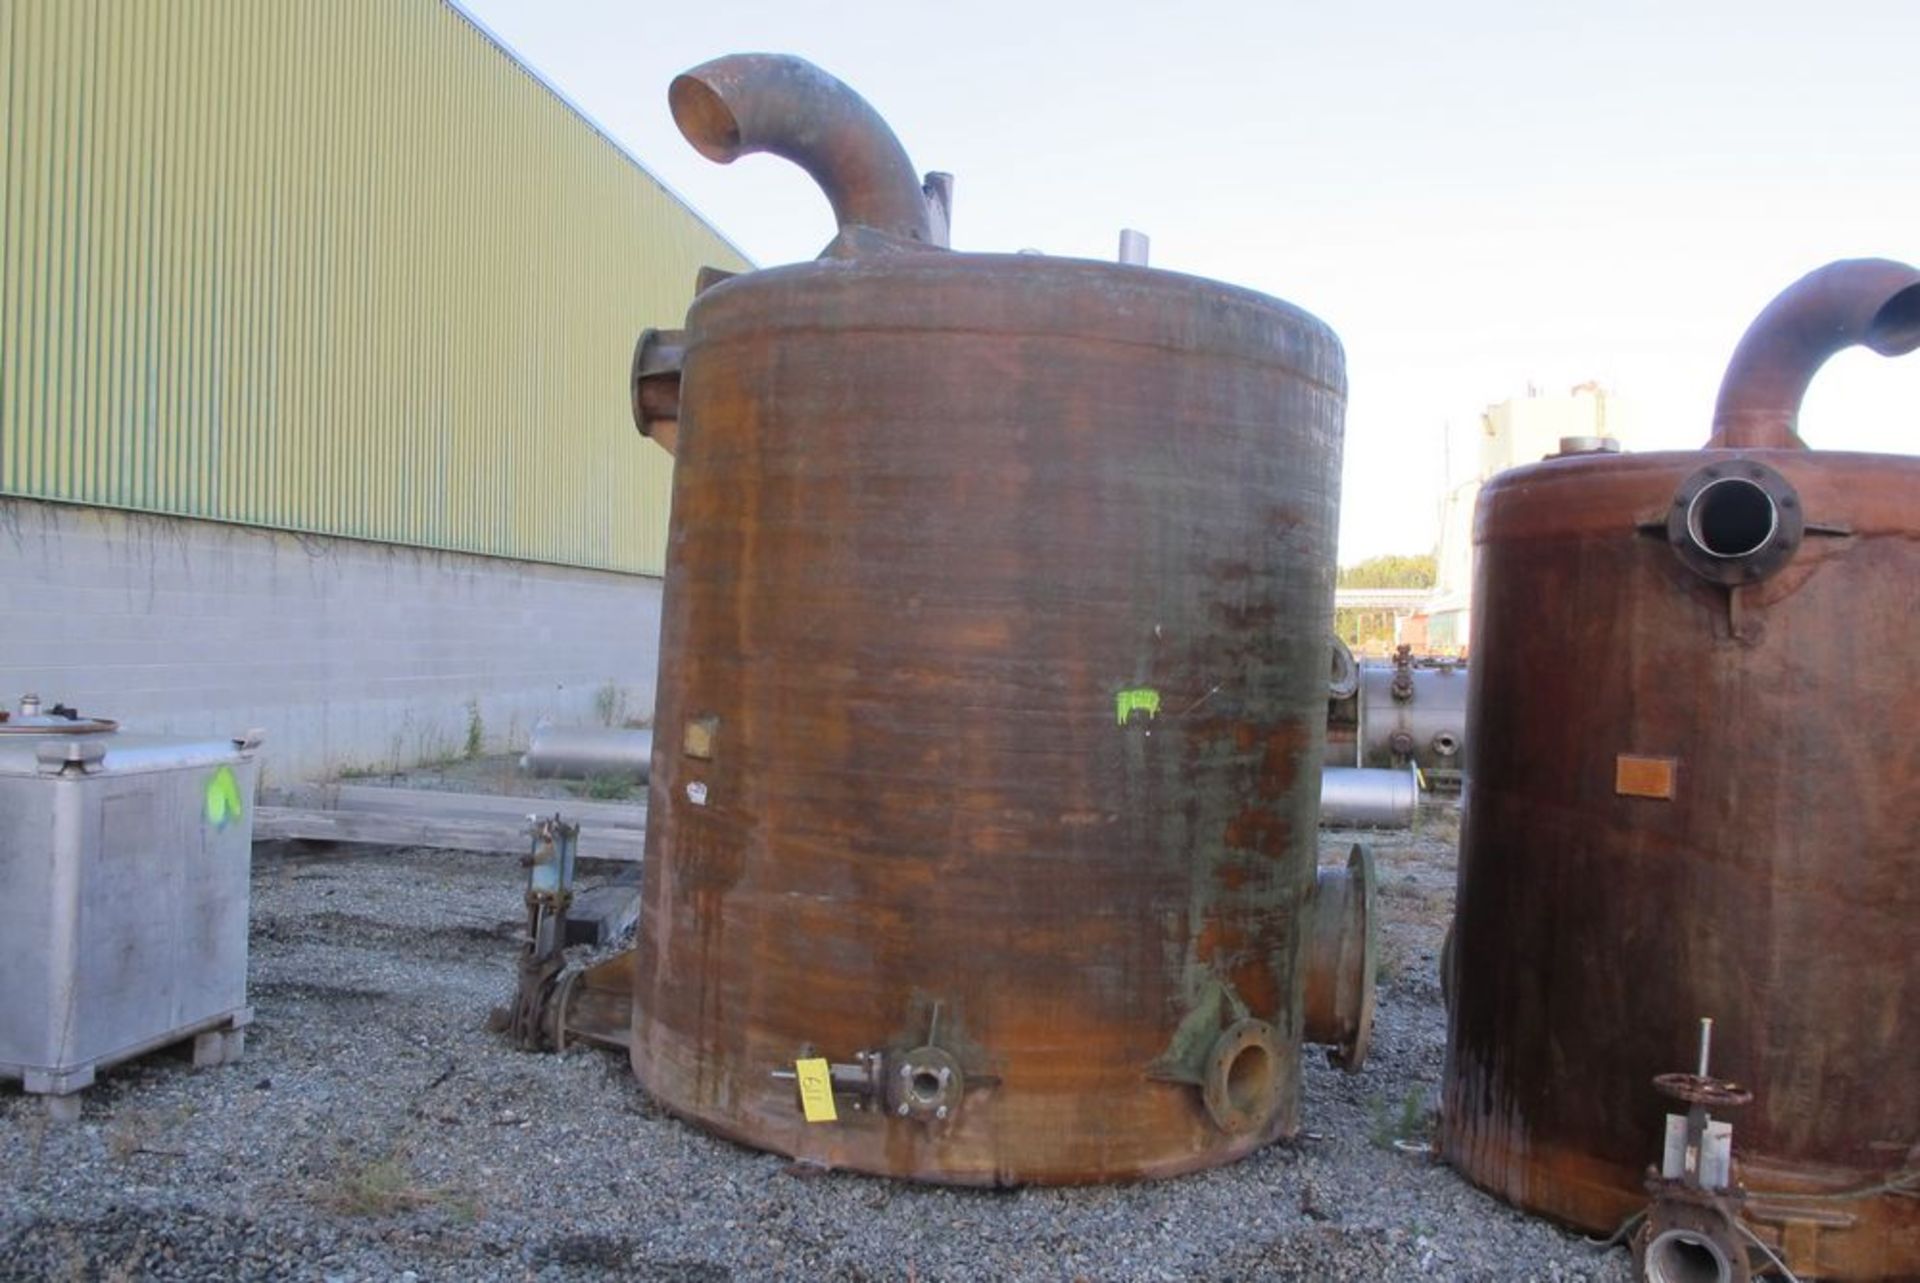 TYWOOD INDUSTRY SCREENED WASH WATER FIBERGLASS TANK W/2 VALVES (NORTH OF 50 WHSE - IN YARD)